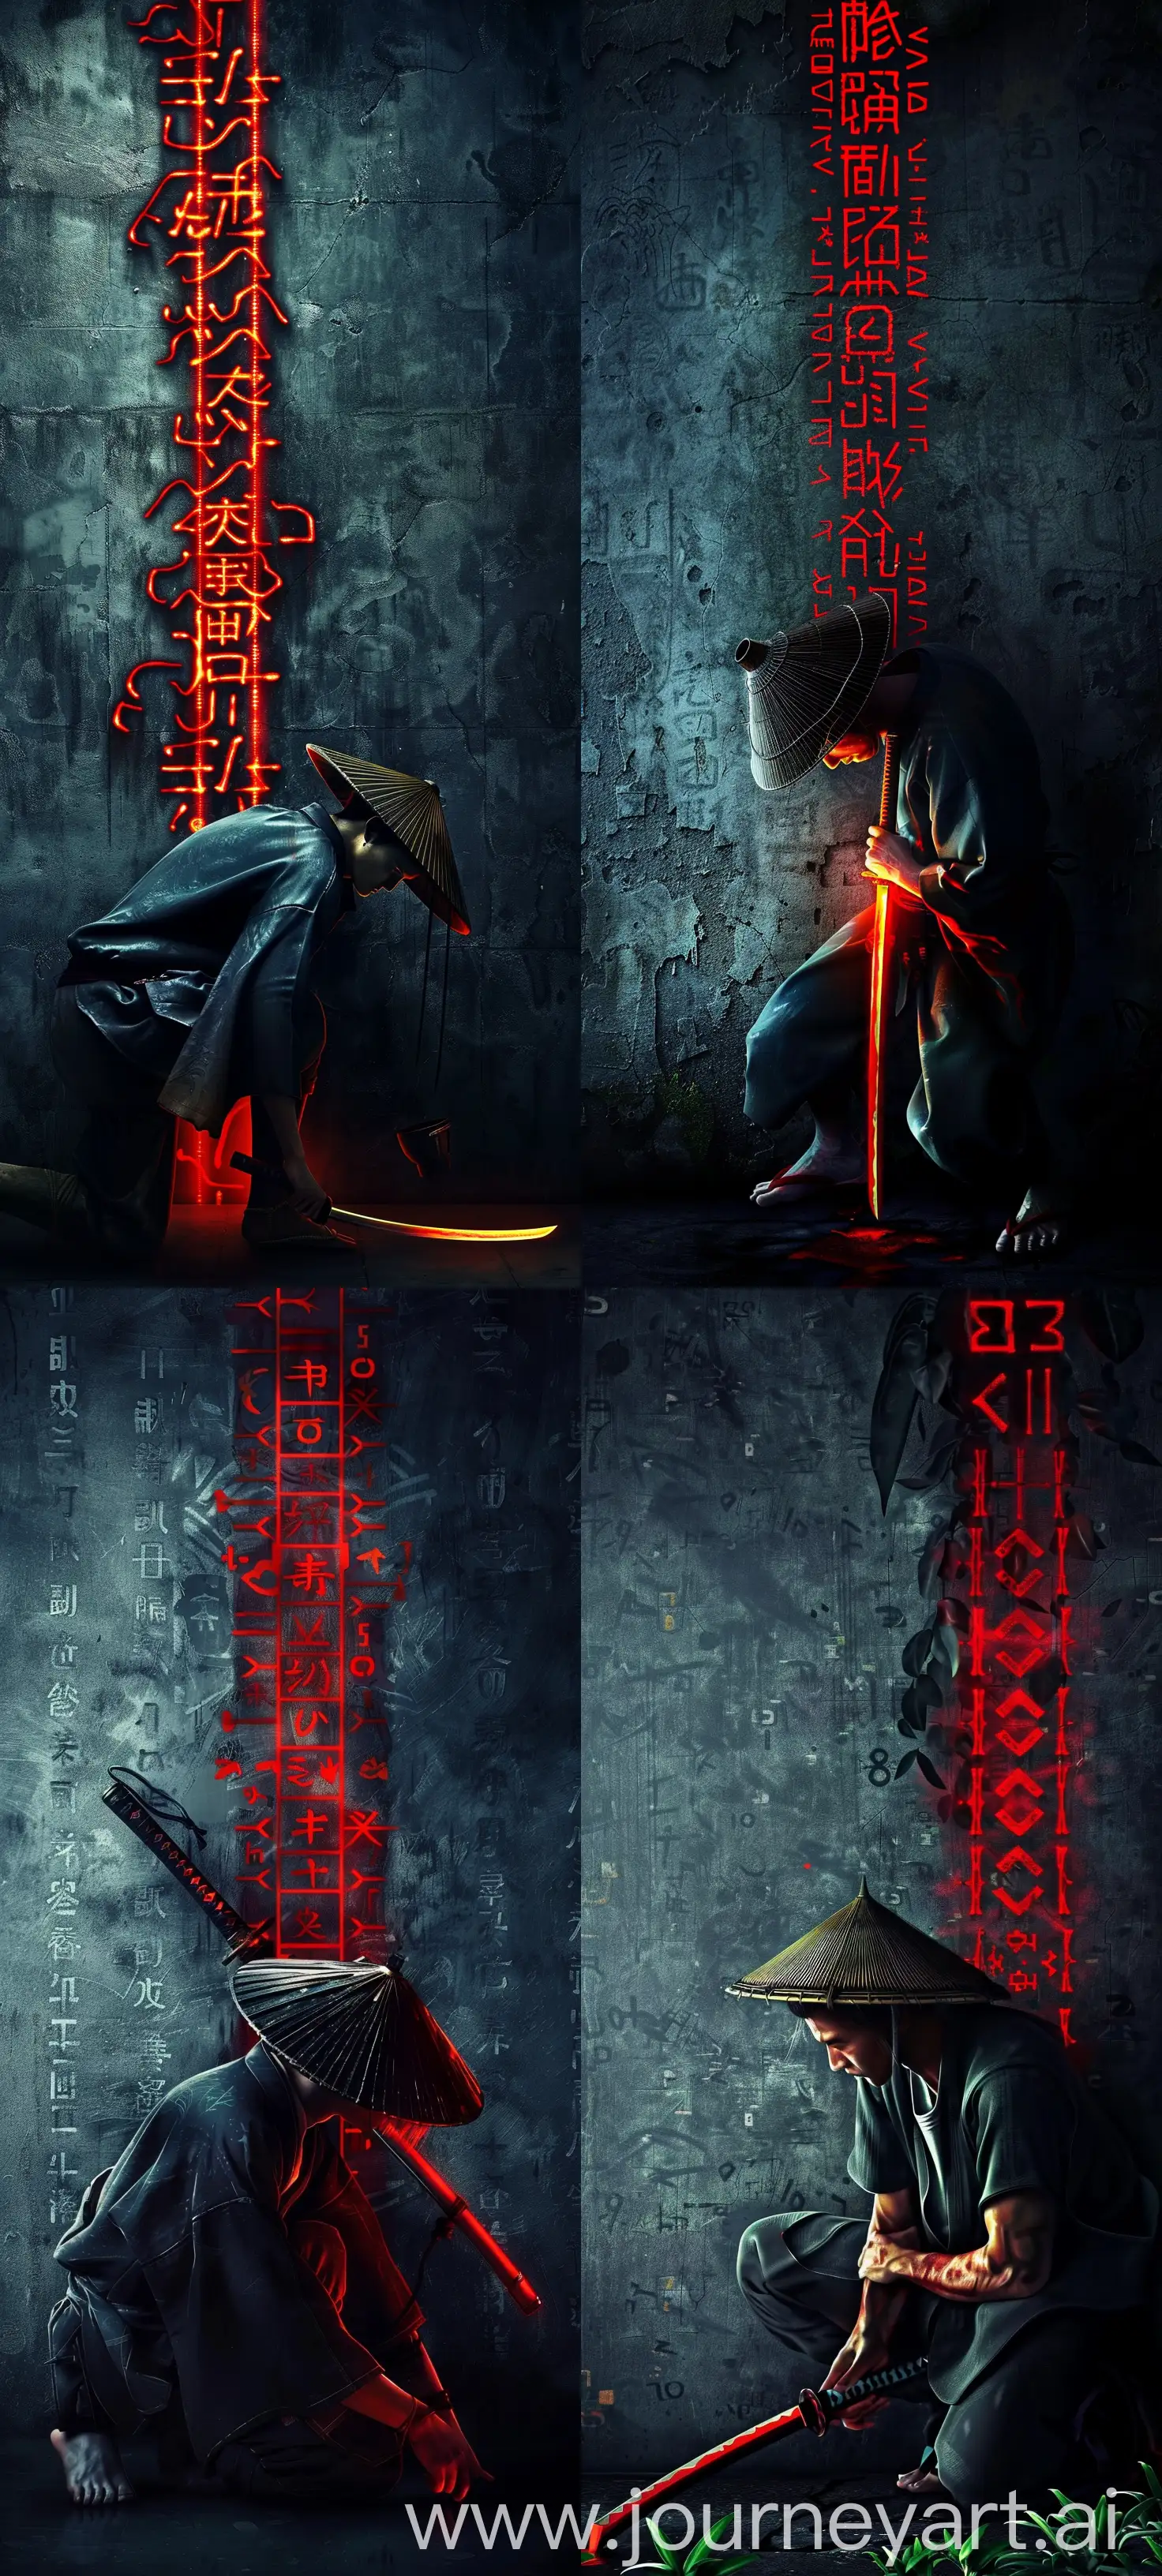 A samurai stands on one knee against a gray wall with a matrix code of glowing red hieroglyphs running along it, leans on a glowing katana, looks down, head completely hidden behind a bamboo hat, intricate, glow, dark background, hyperrealistic, 8k --sw 750 --ar 9:20 --sref https://i.postimg.cc/m2M14nWJ/e0b3fdb340db0f79c2d2f9d8b1c97819.jpg